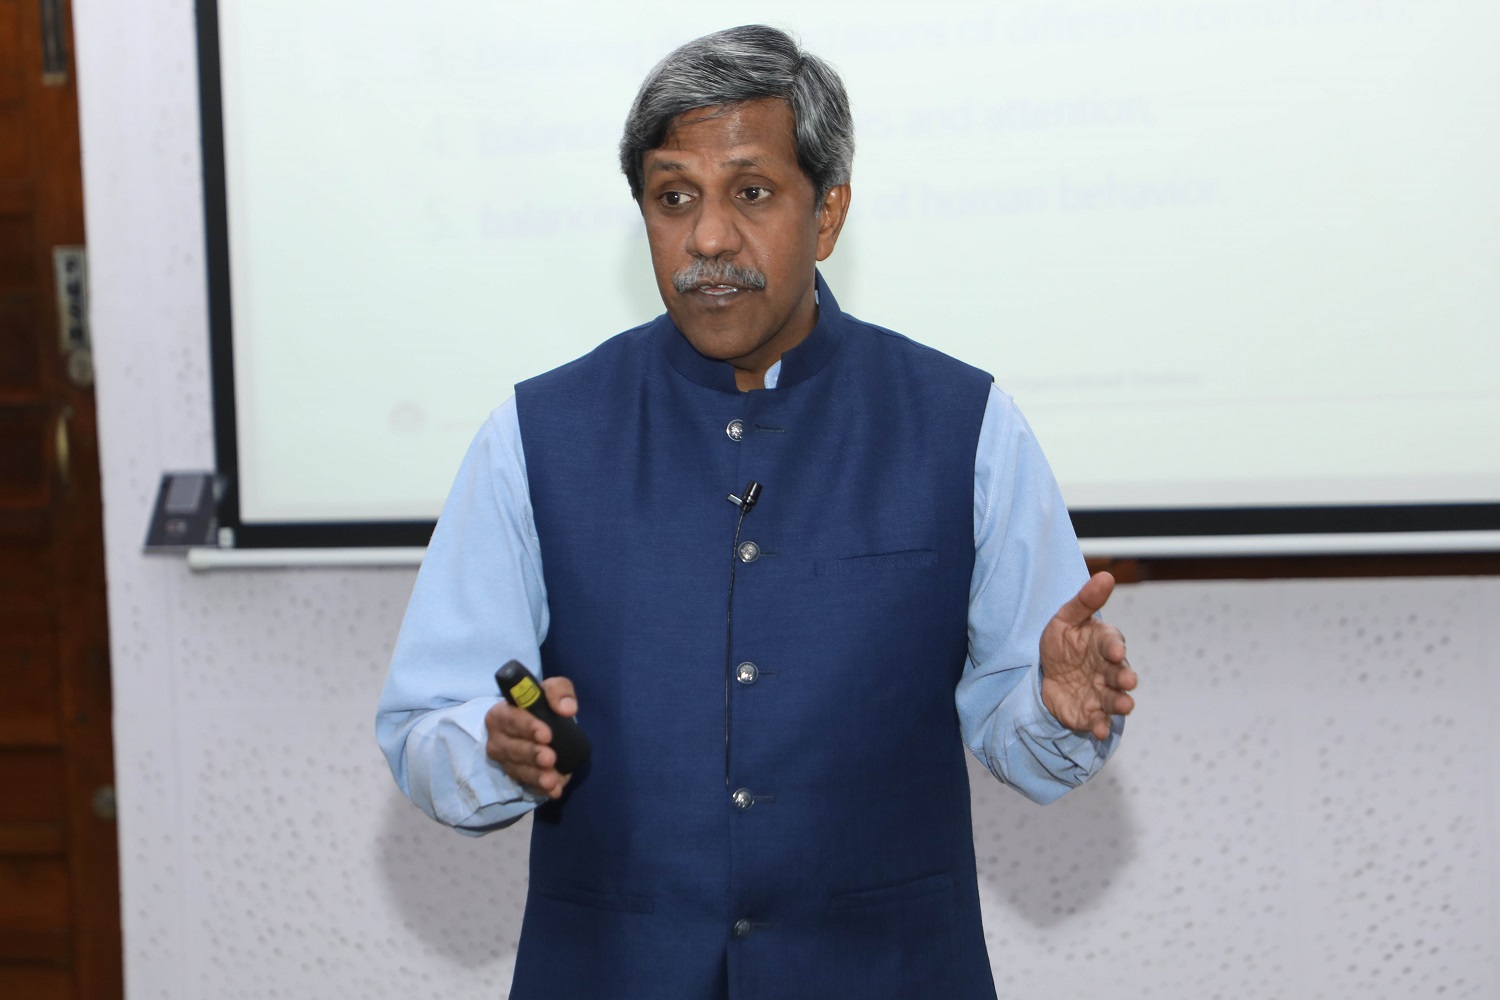 Prof. P D Jose of the Strategy area, IIMB, speaks on: ‘Building Resilience in Organizations’.